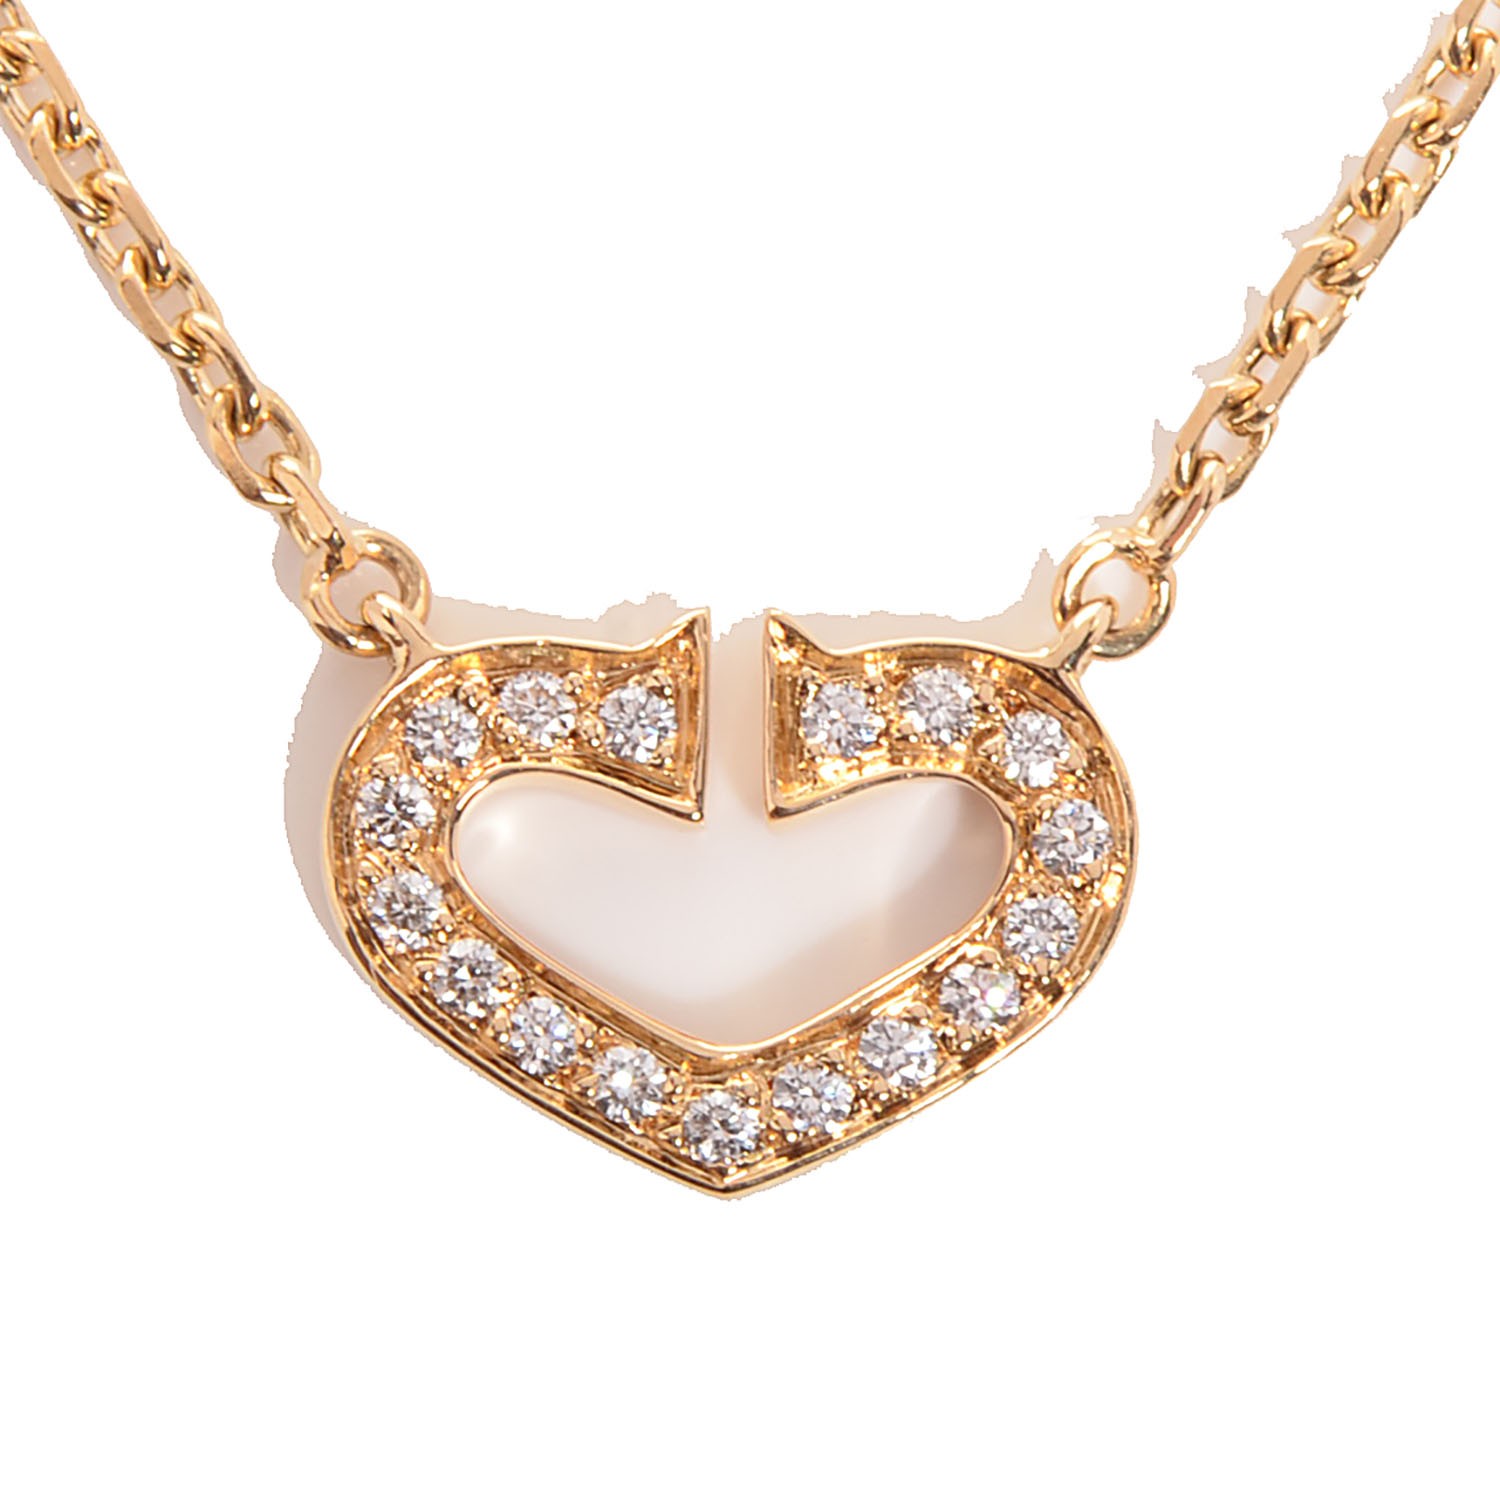 CARTIER 18K Yellow Gold Diamond Hearts And Symbols Pendant Necklace 92514